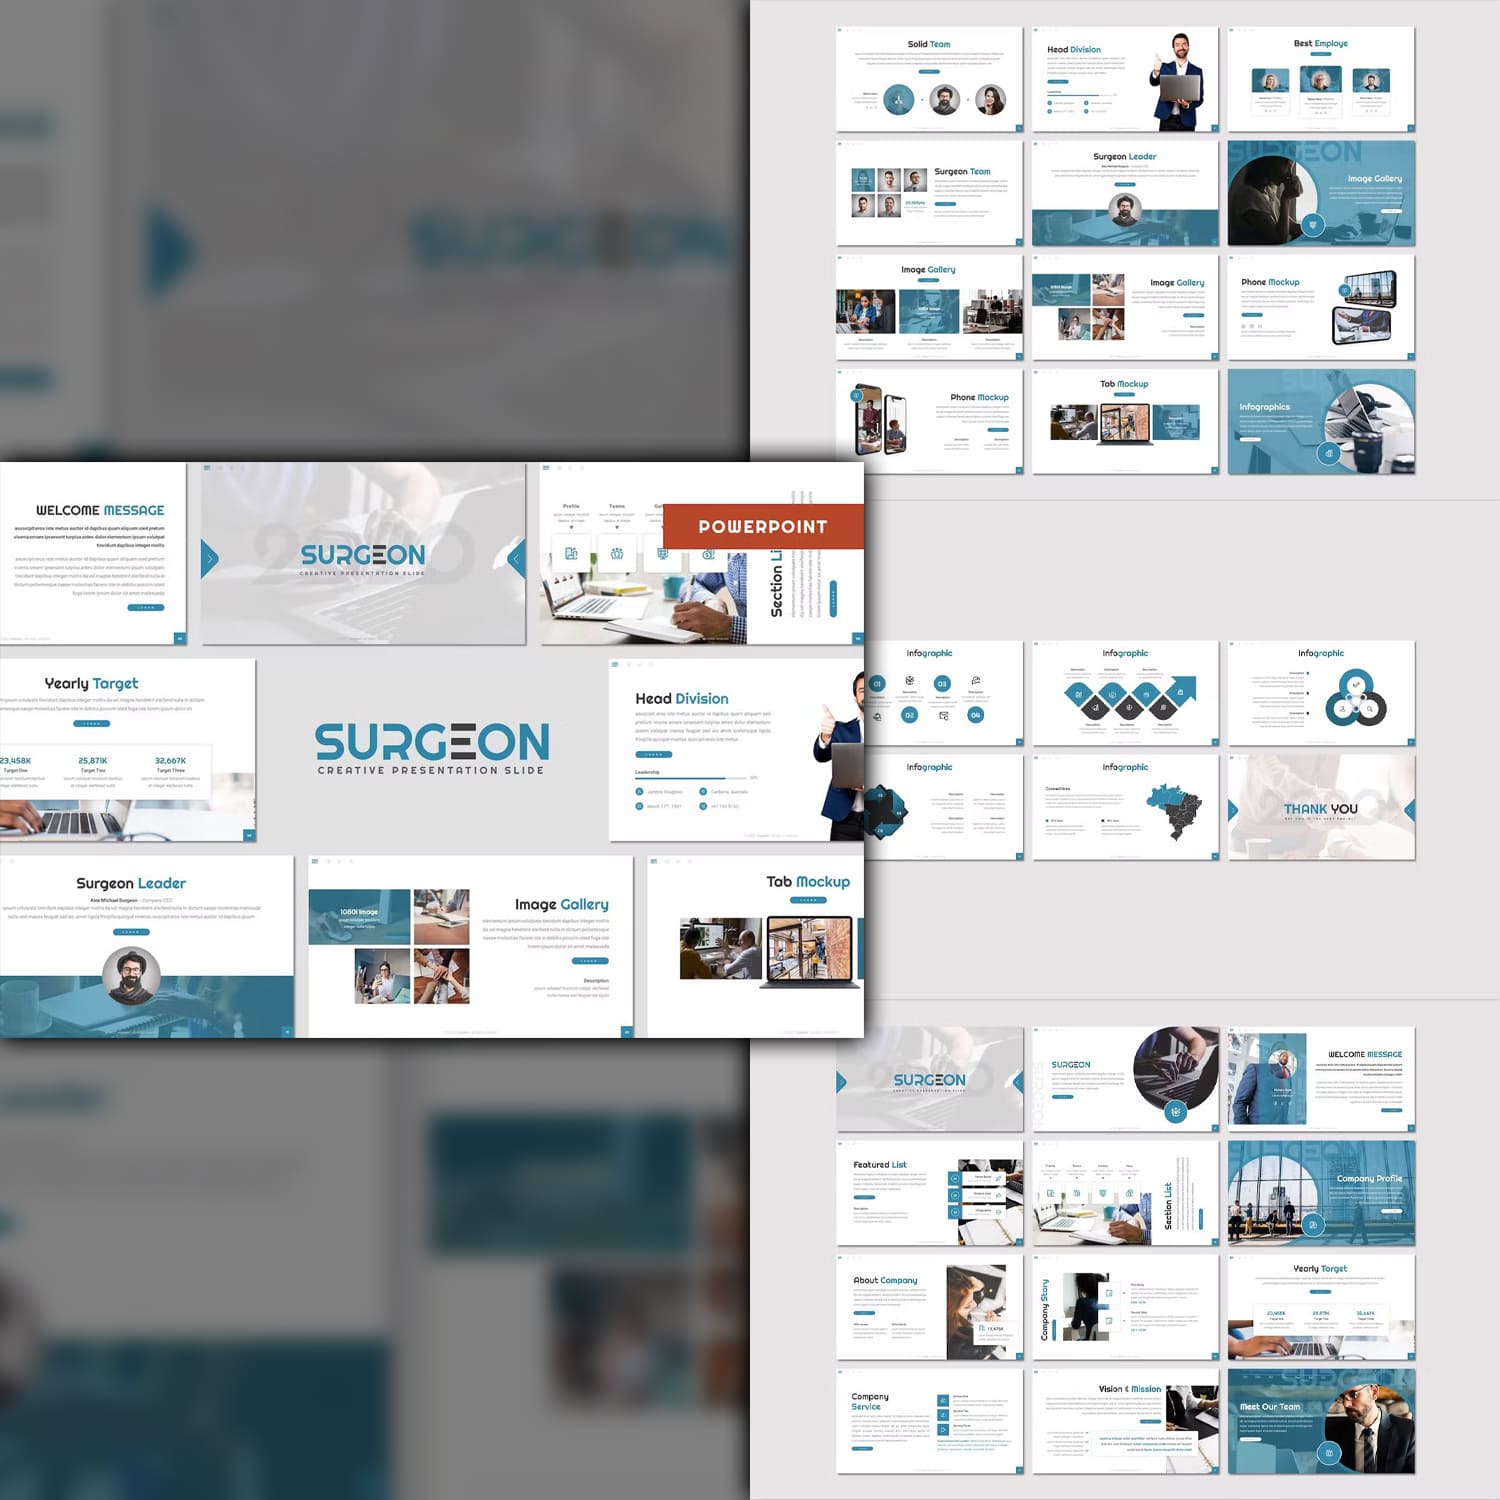 Surgeon business powerpoint template from invisualstudio.